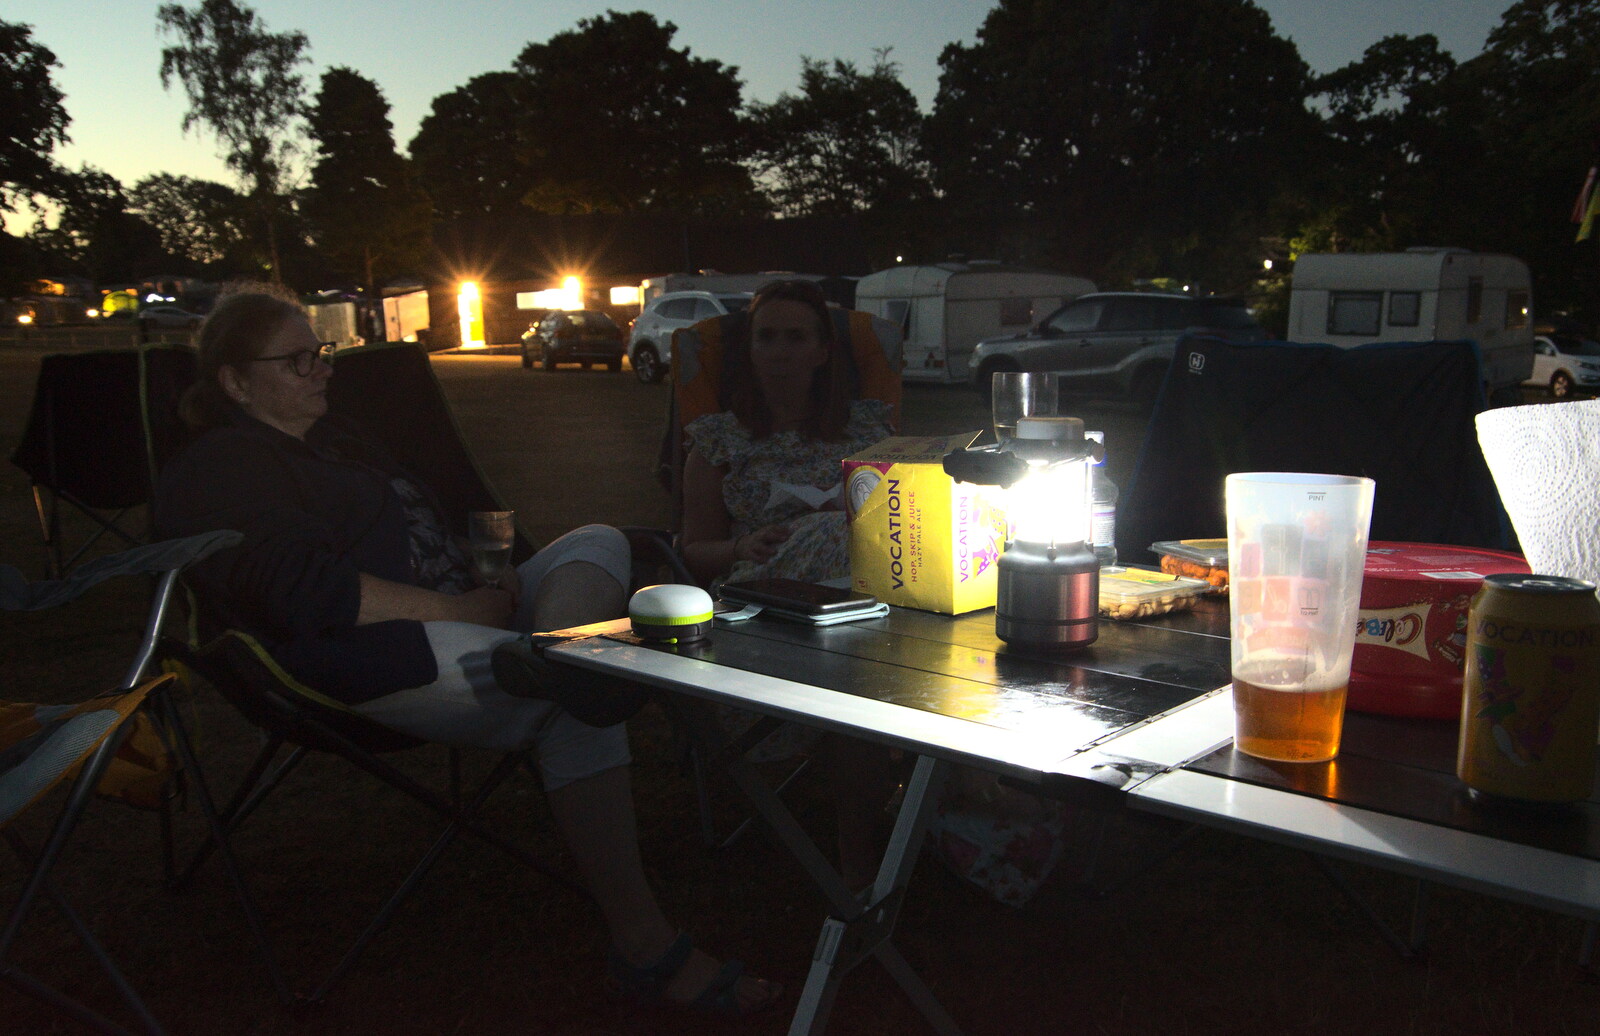 Drinks by the light of a camping lantern from Camping at Forest Park, Cromer, Norfolk - 12th August 2022